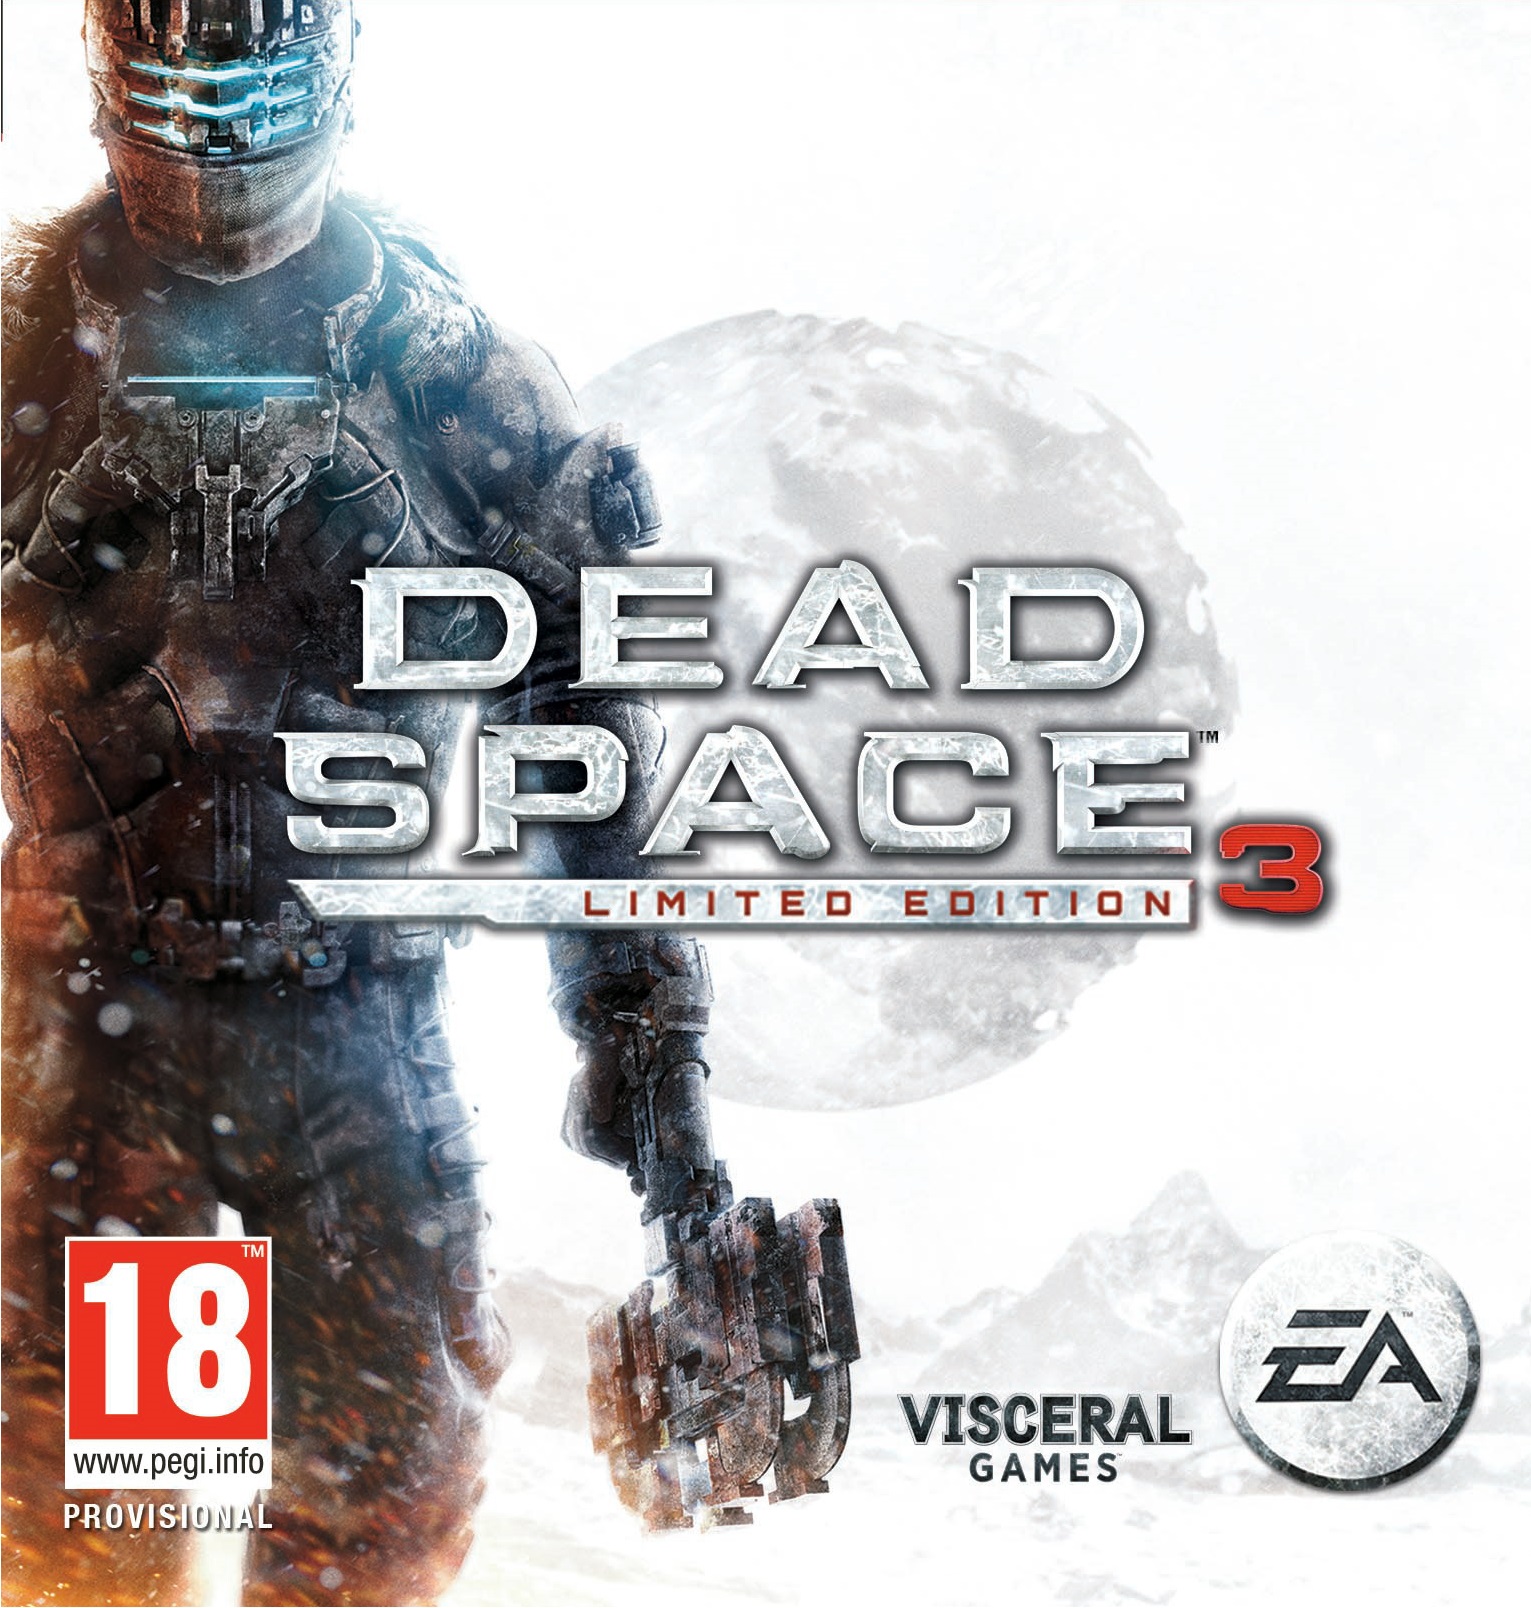 dead space 3 limited edition ps3 cover art